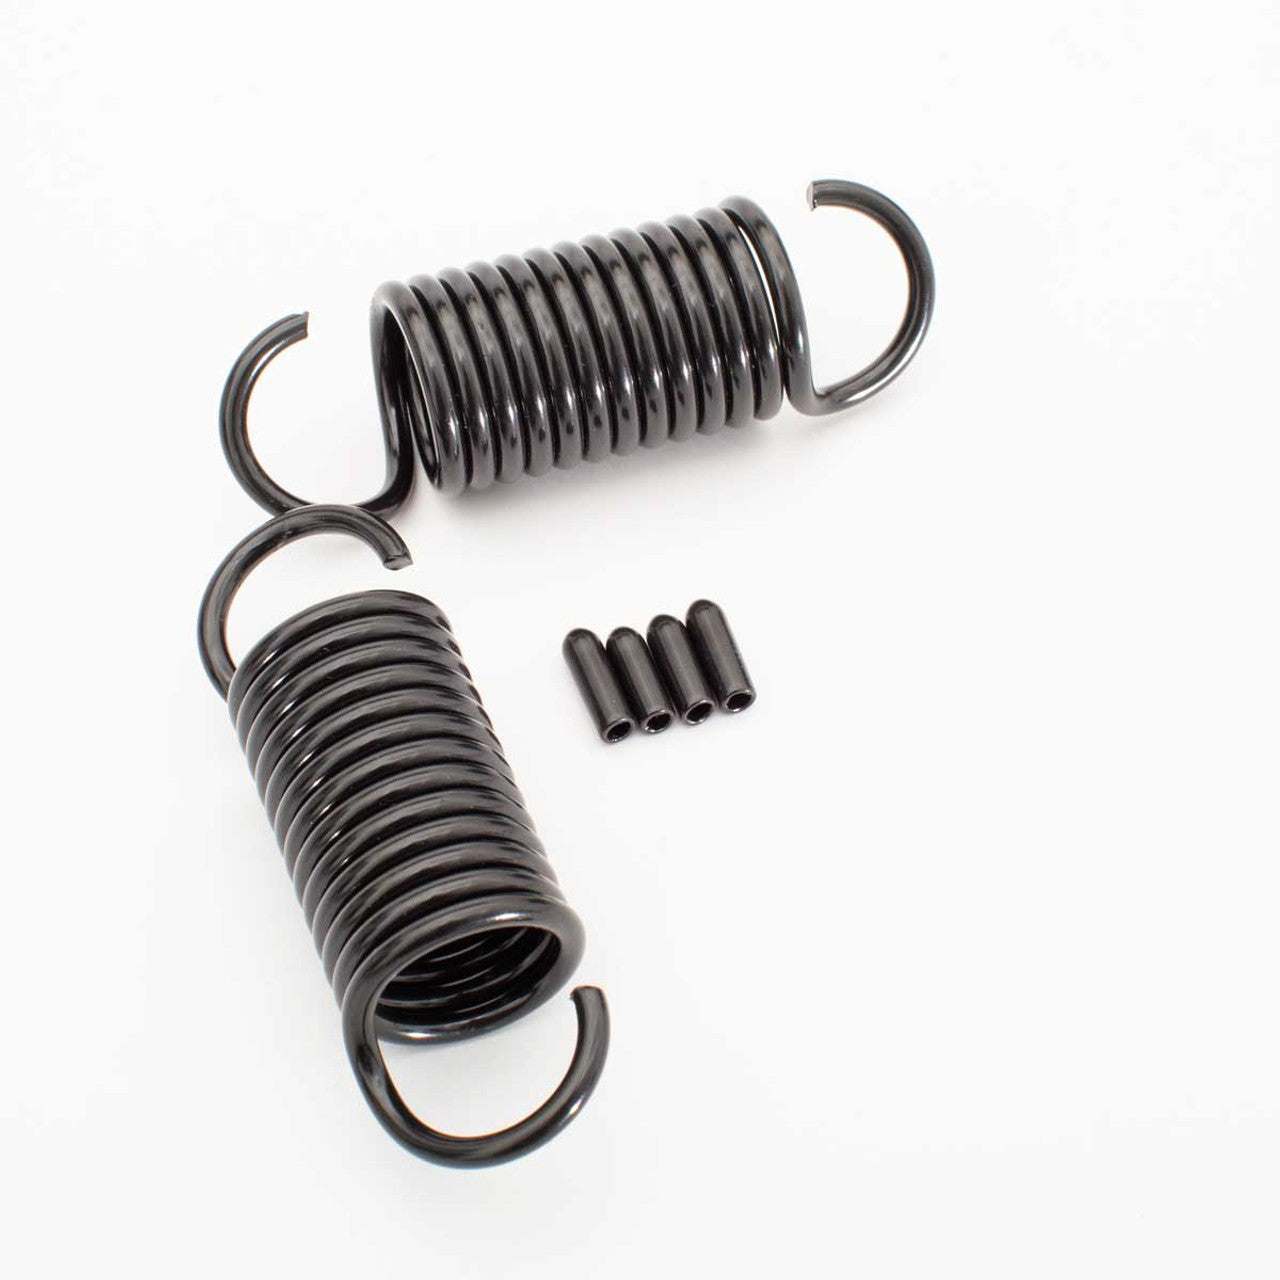 Replacement Band Springs - Set of 2